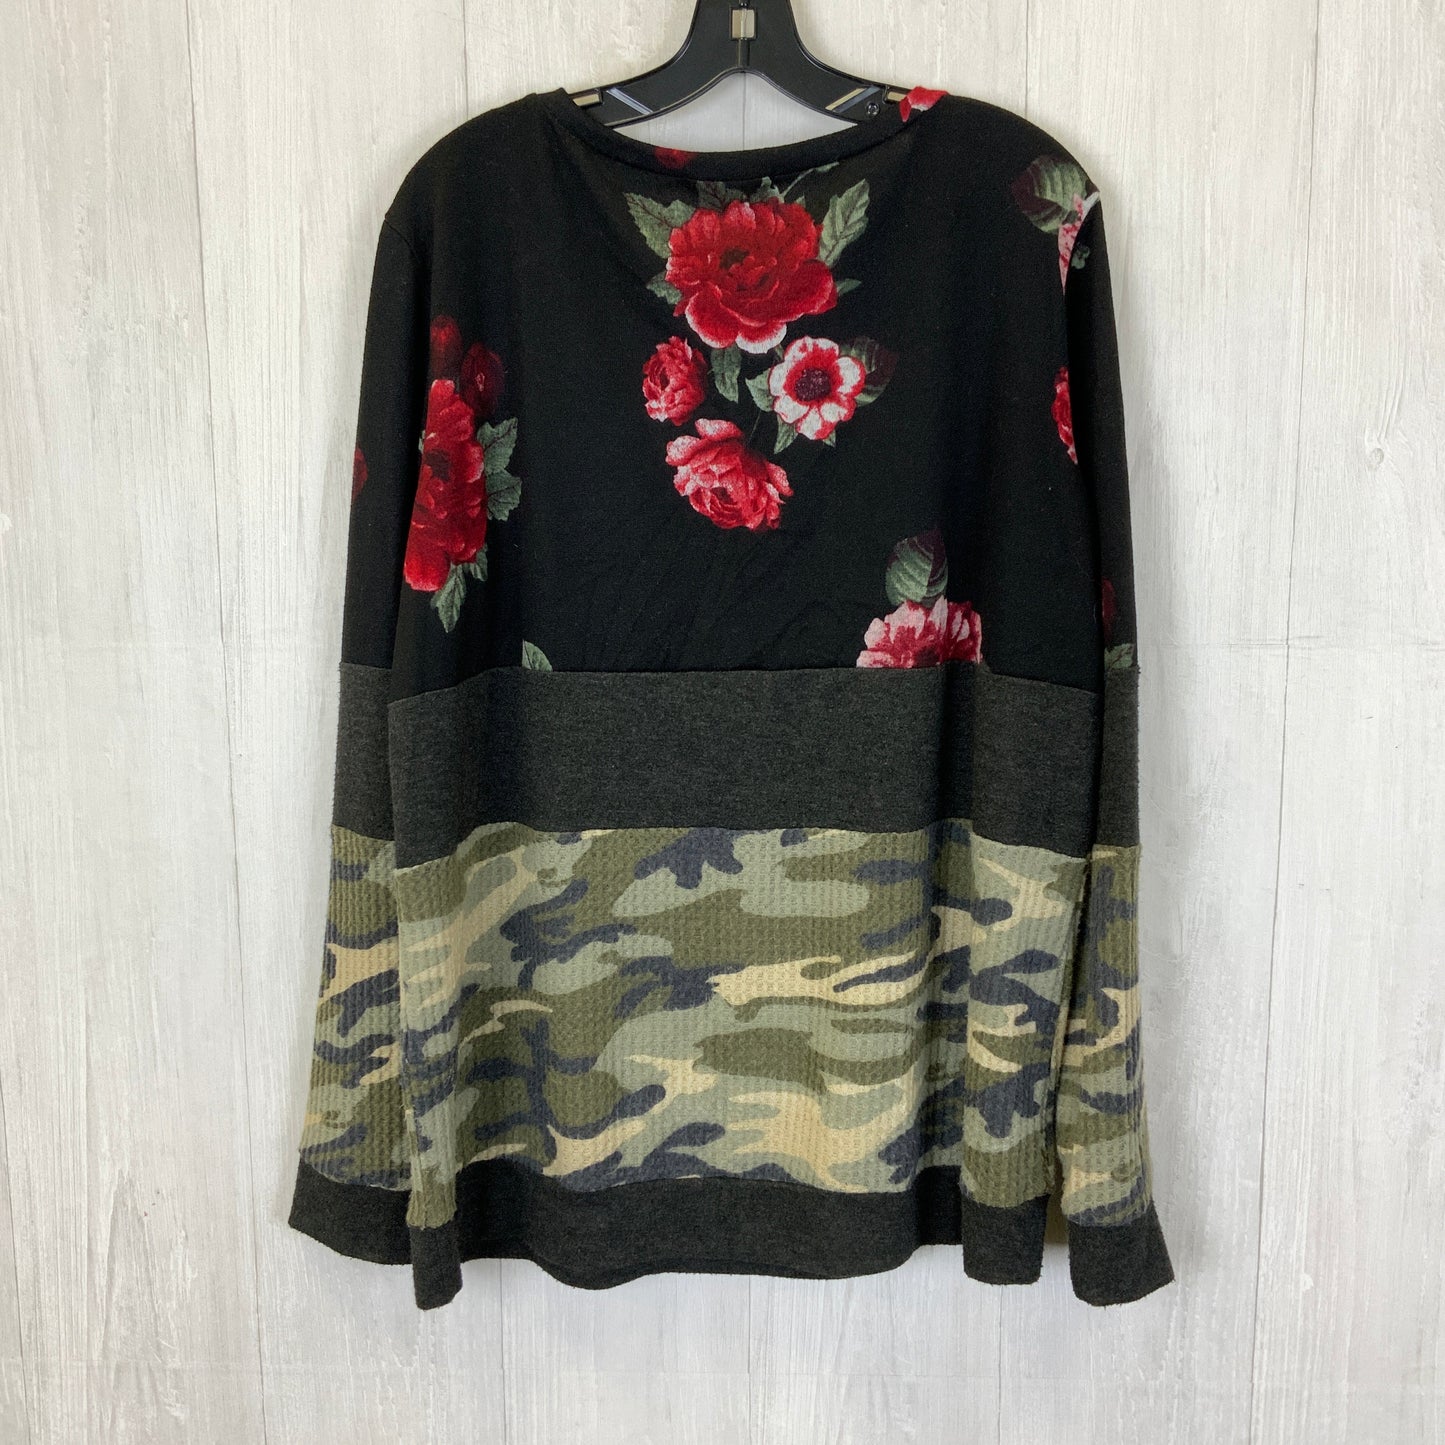 Black Floral Top Long Sleeve Clothes Mentor, Size 1x